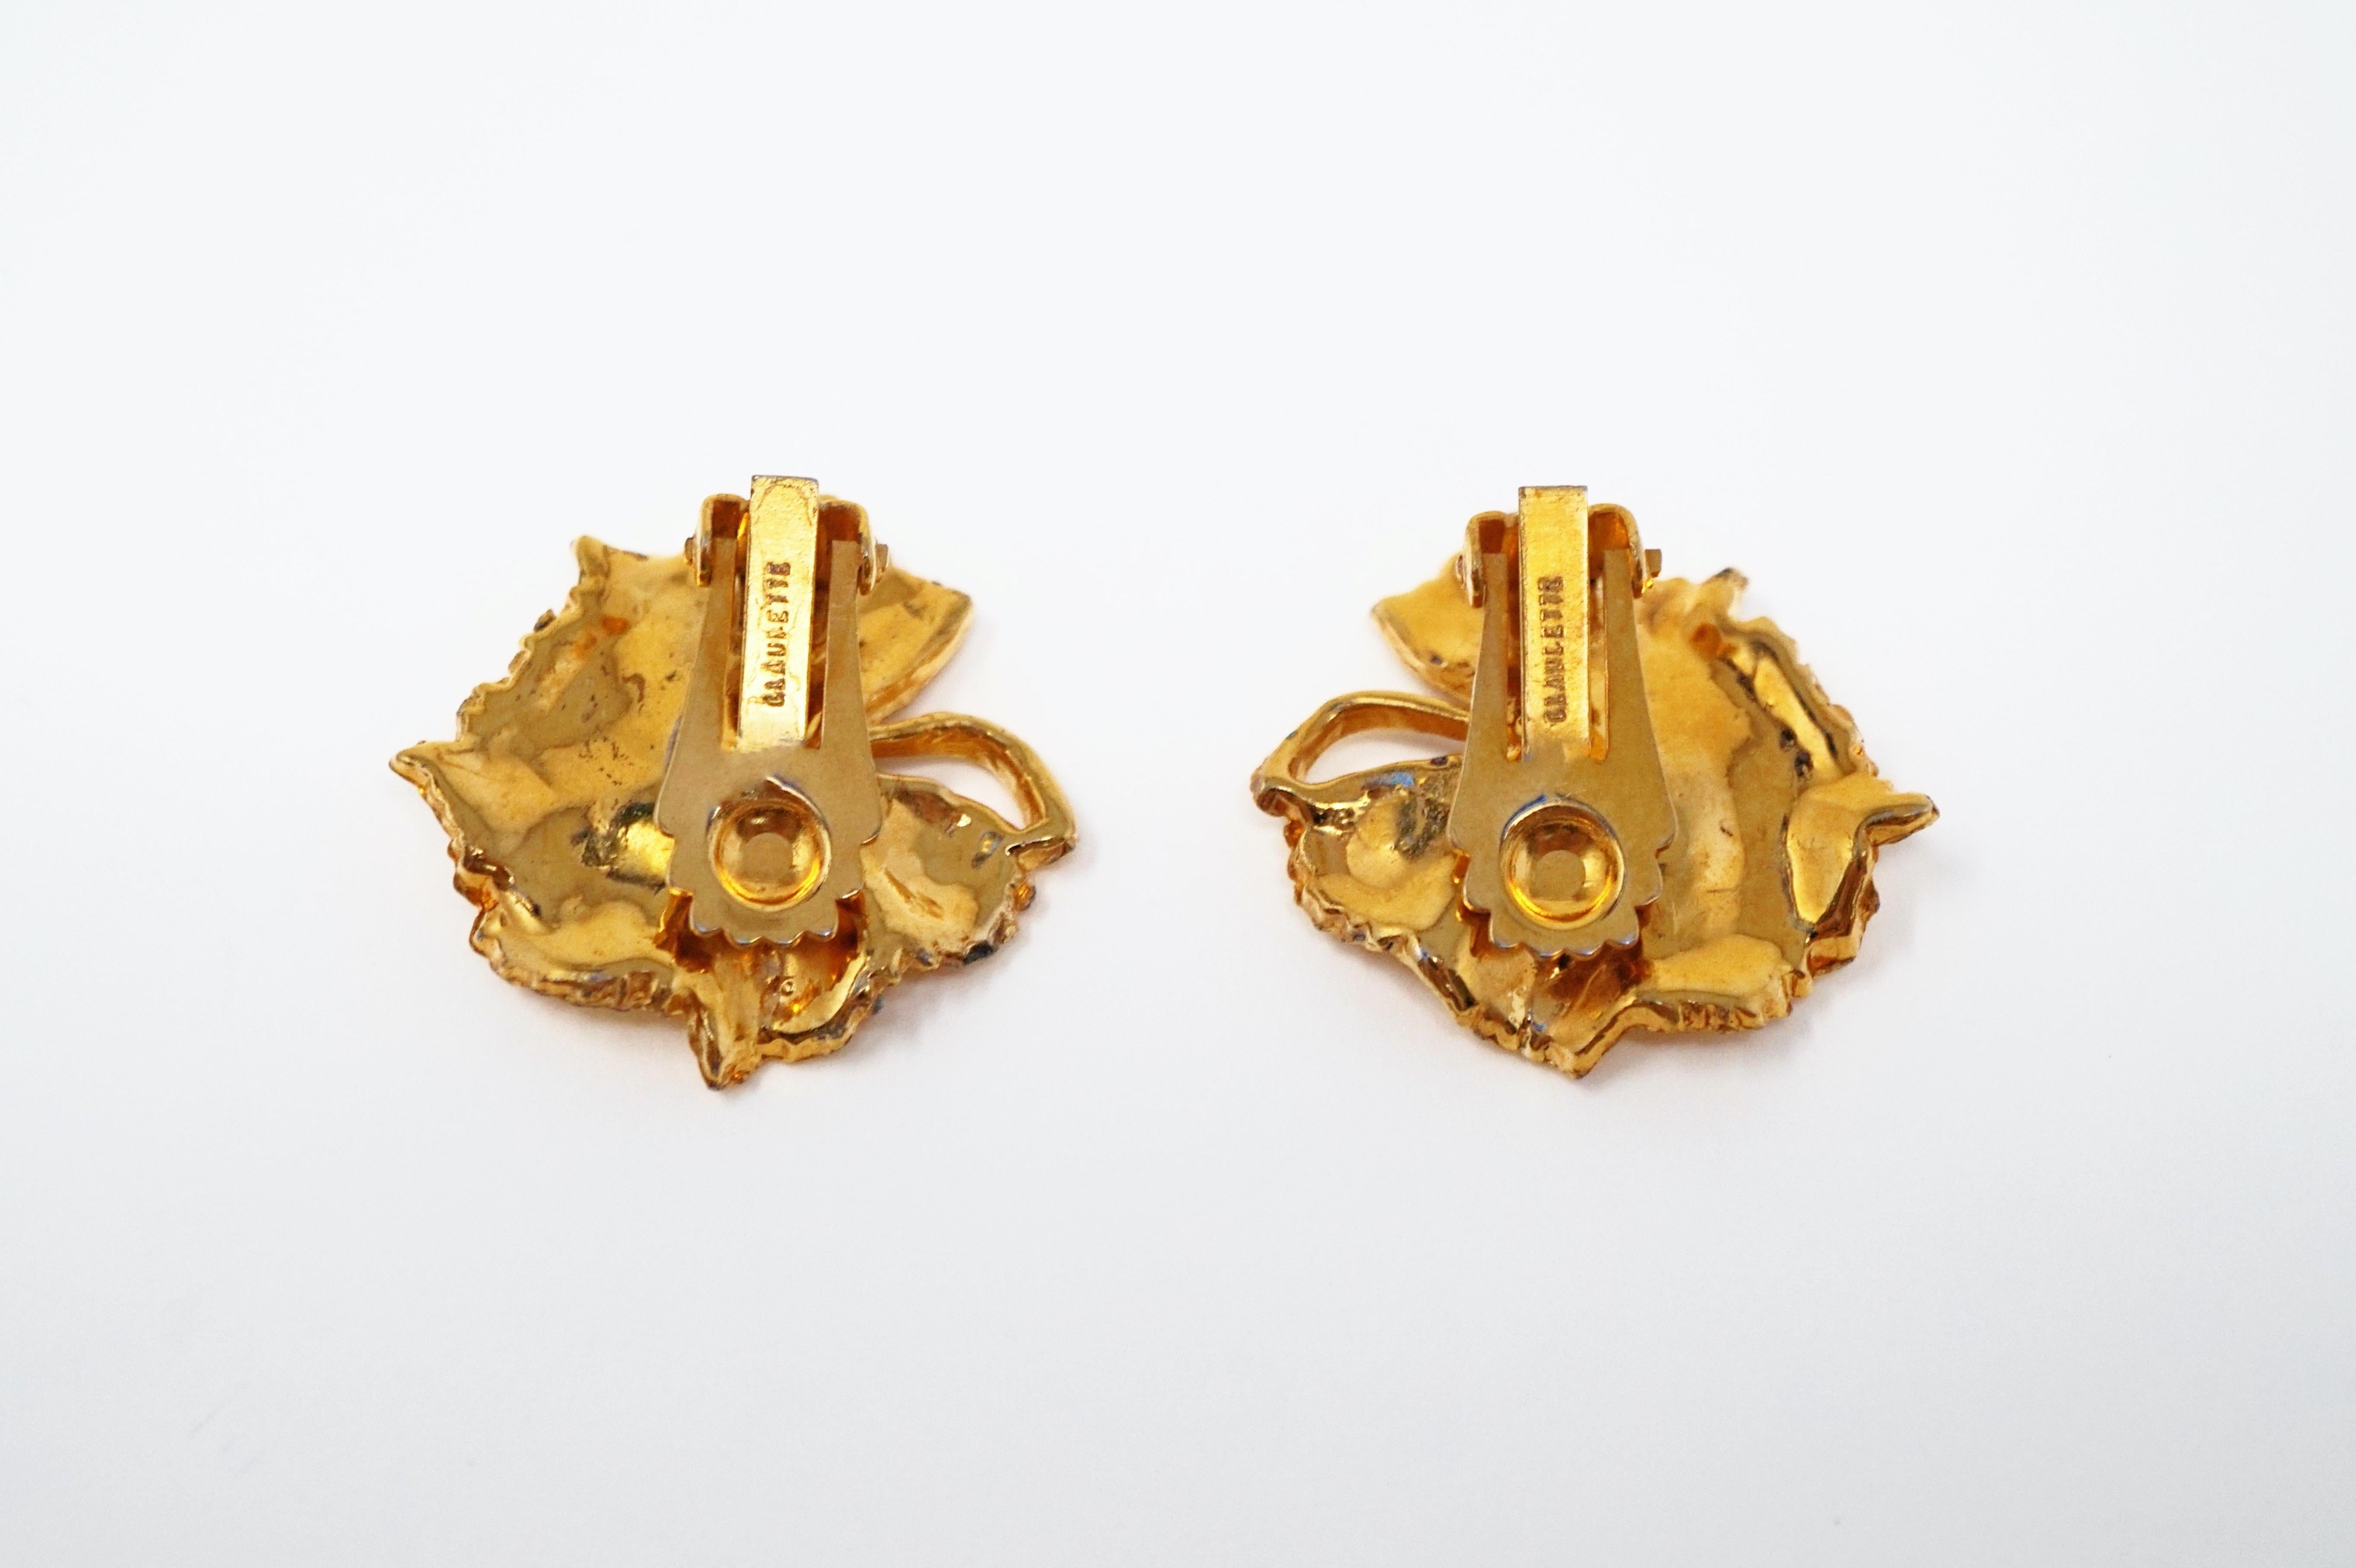 Women's Vintage Gilded Leaf Earrings with Crystal Accents by Claudette, circa 1950s